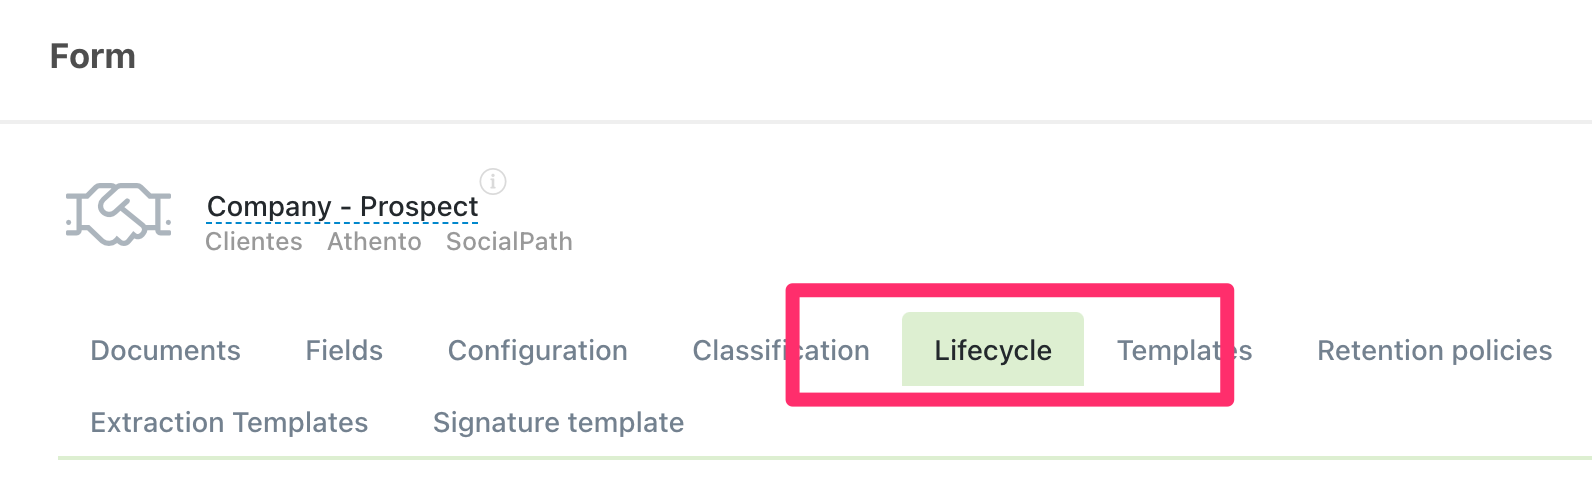 lifecycle-tab.png